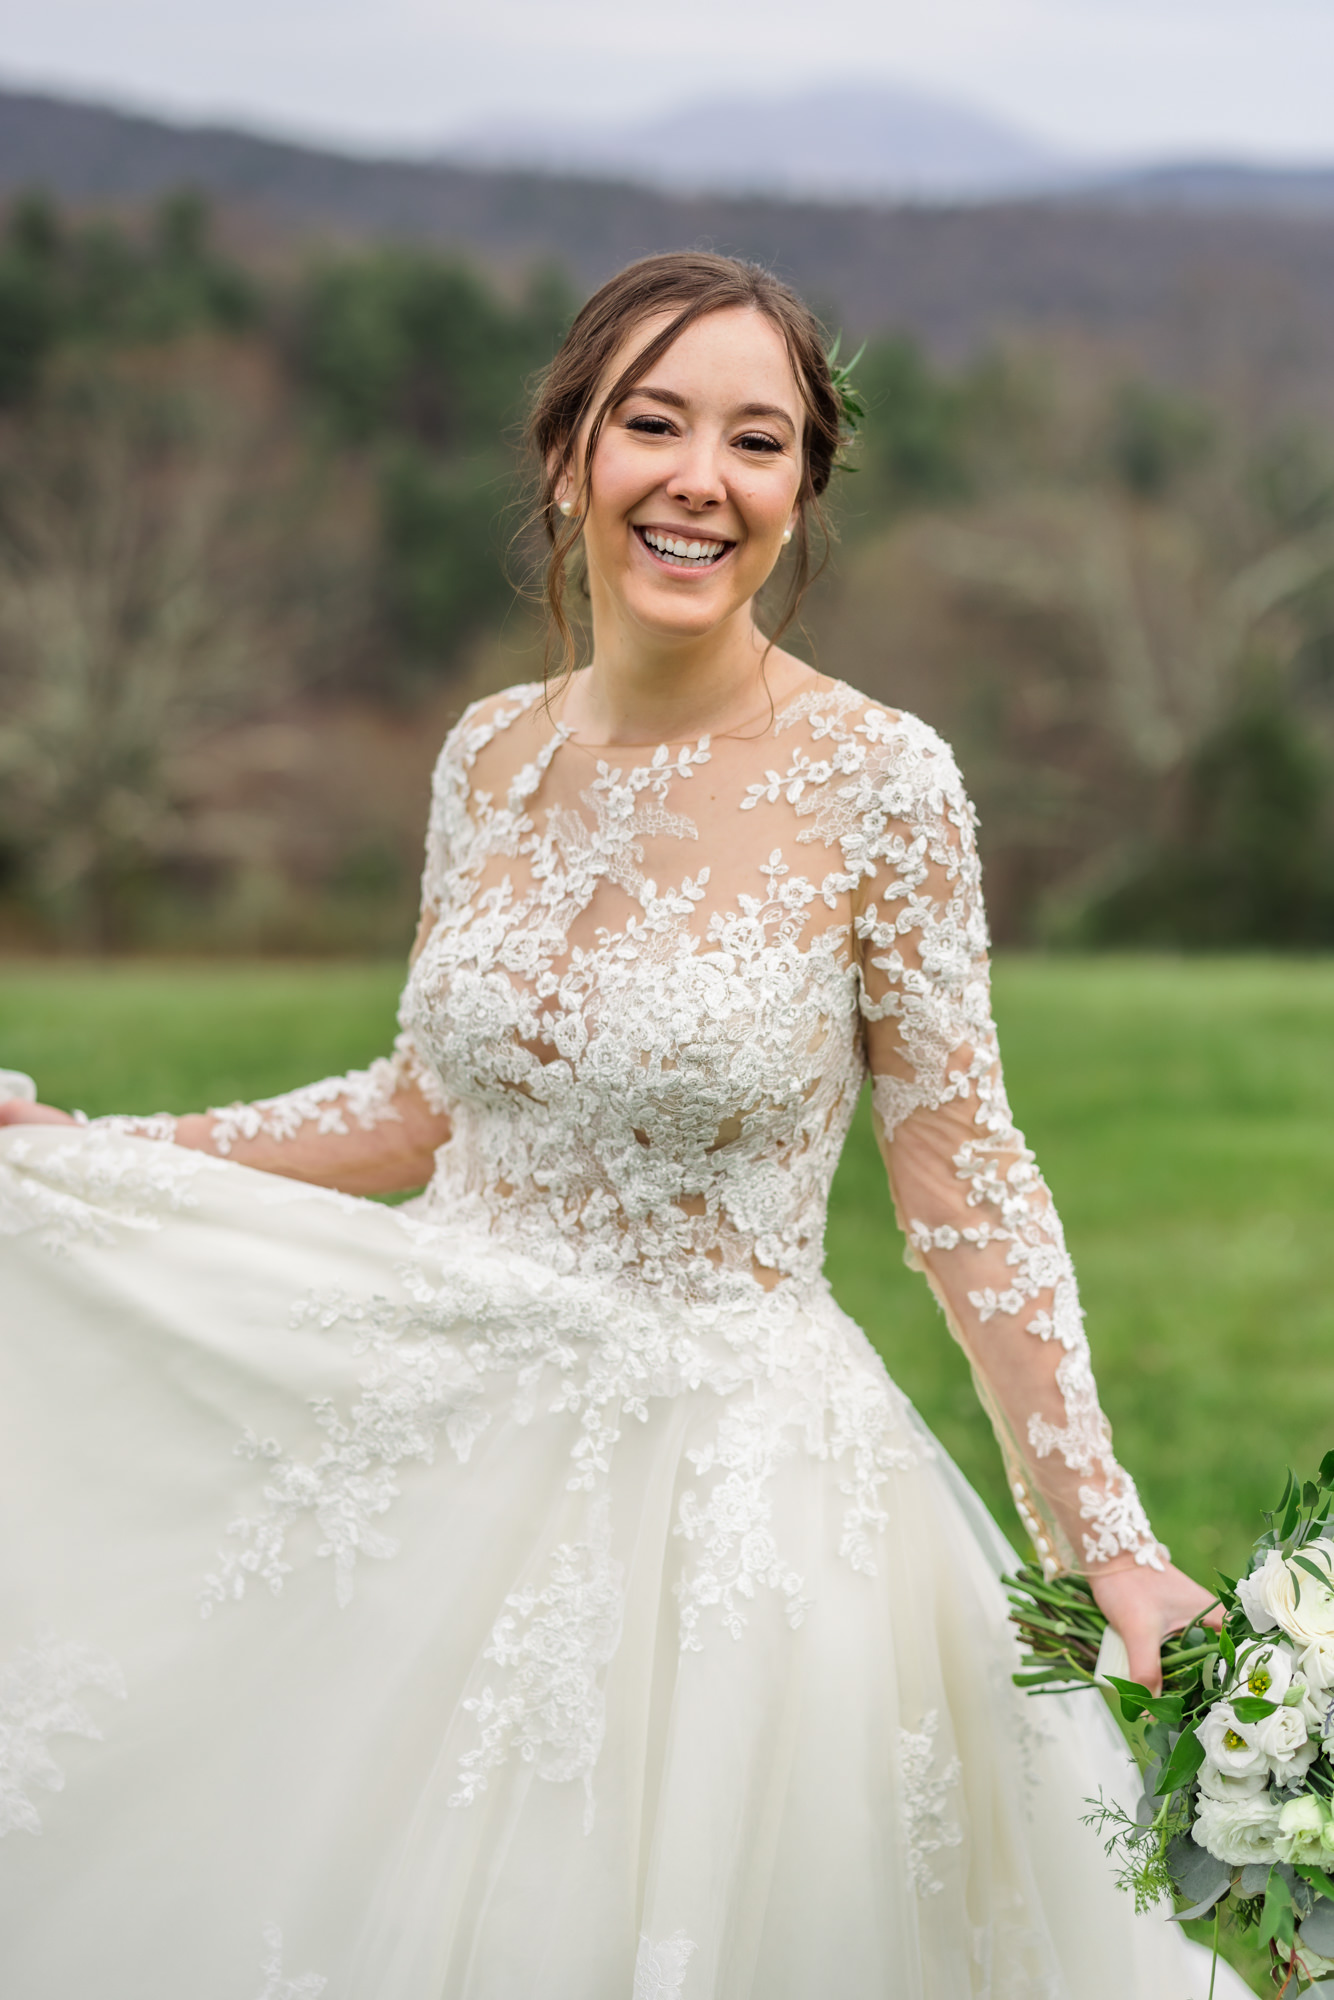 bride swinging dress around and smiling holding floral bouquet